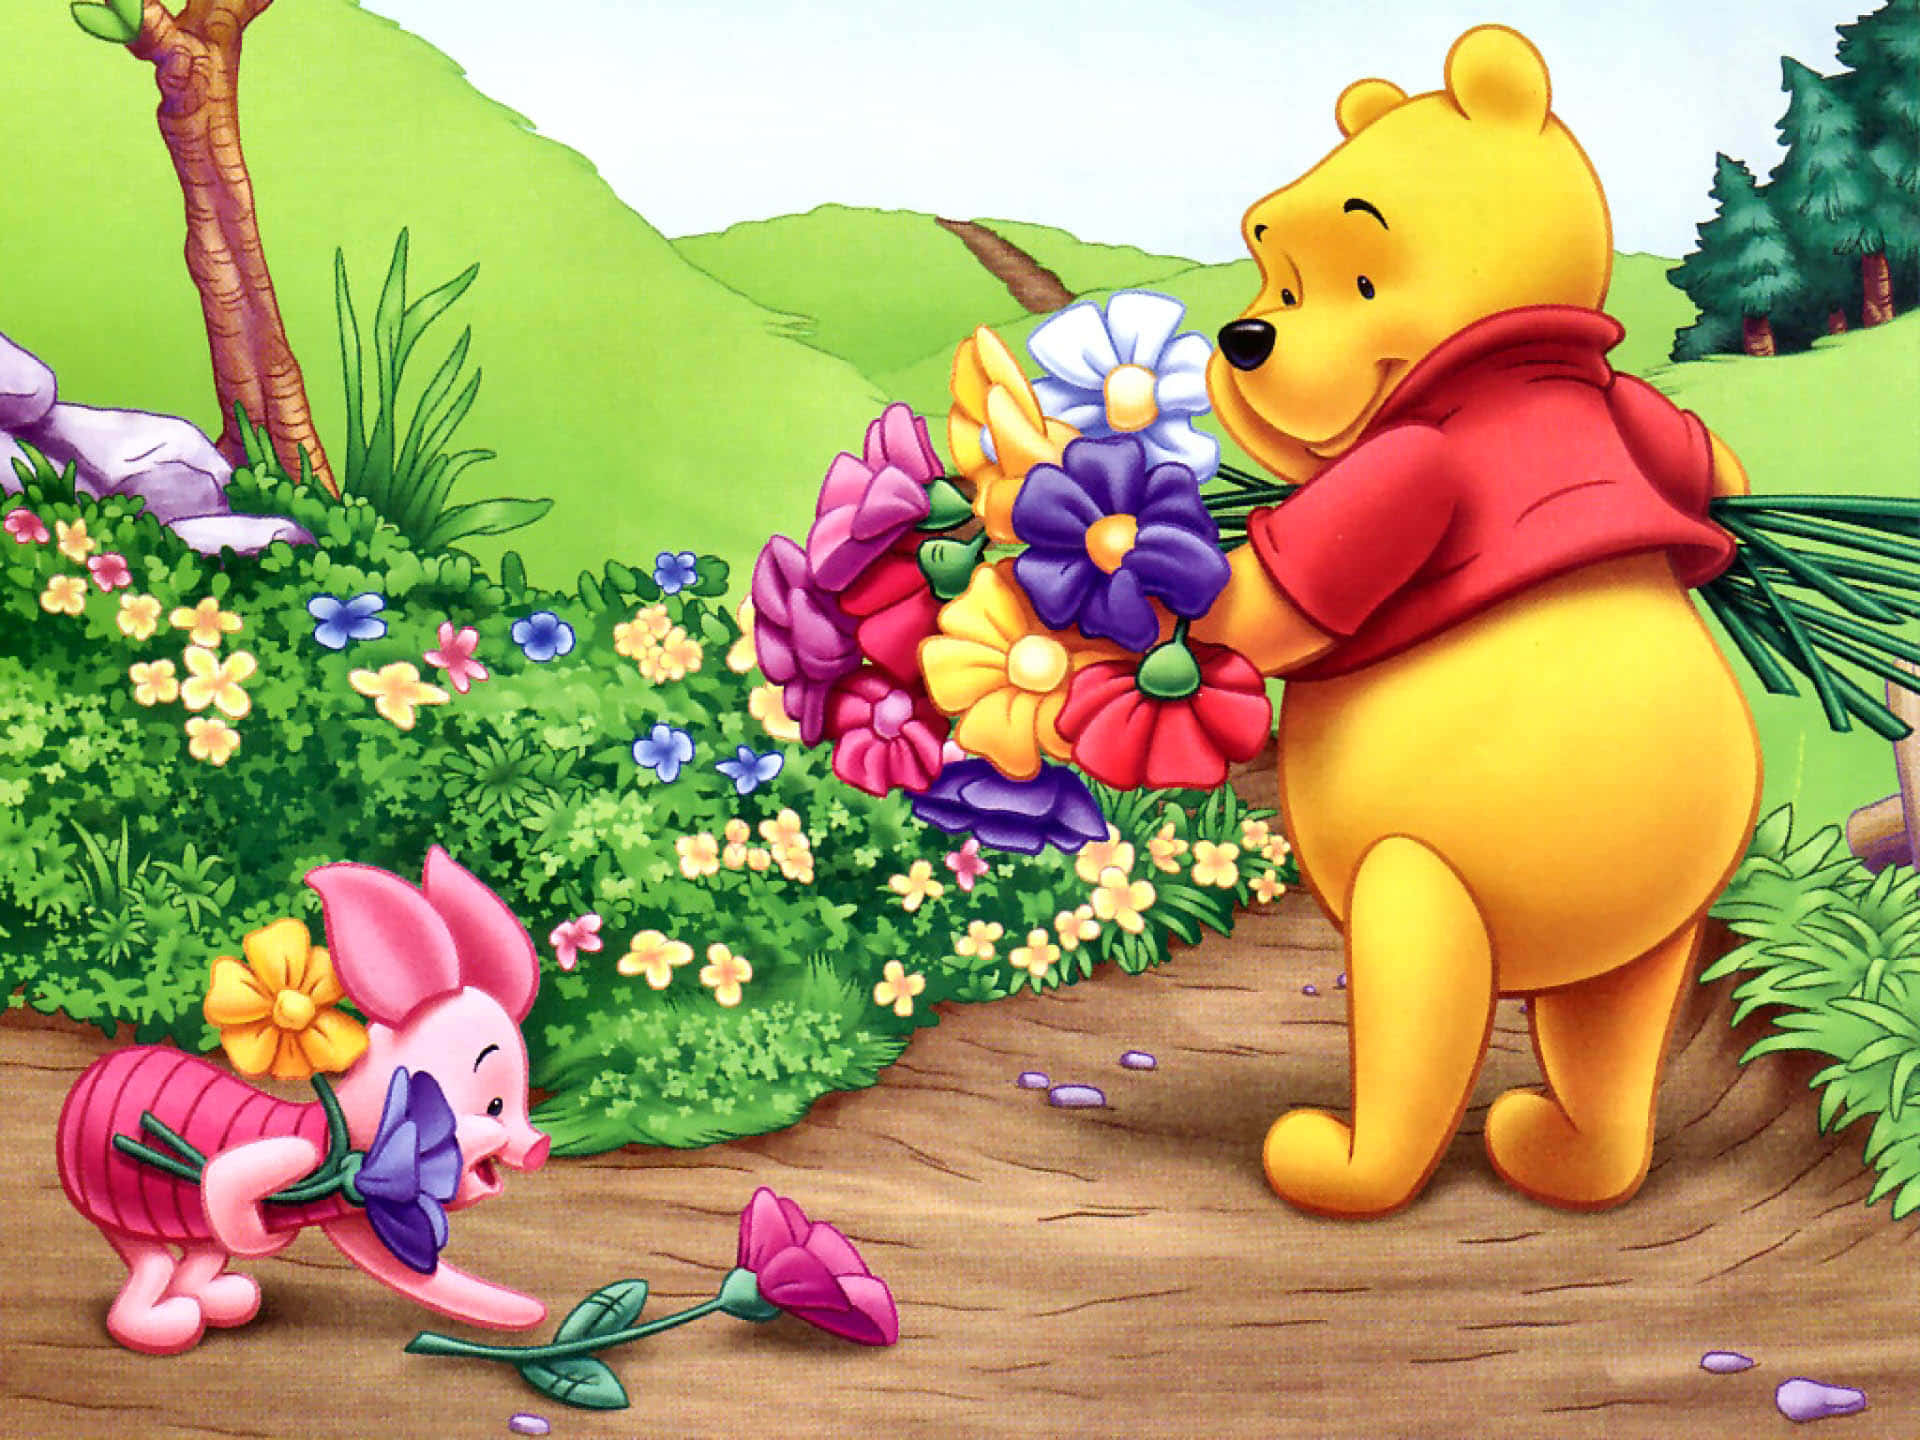 "Explore the wonderful world of Winnie The Pooh with this beautiful desktop wallpaper". Wallpaper